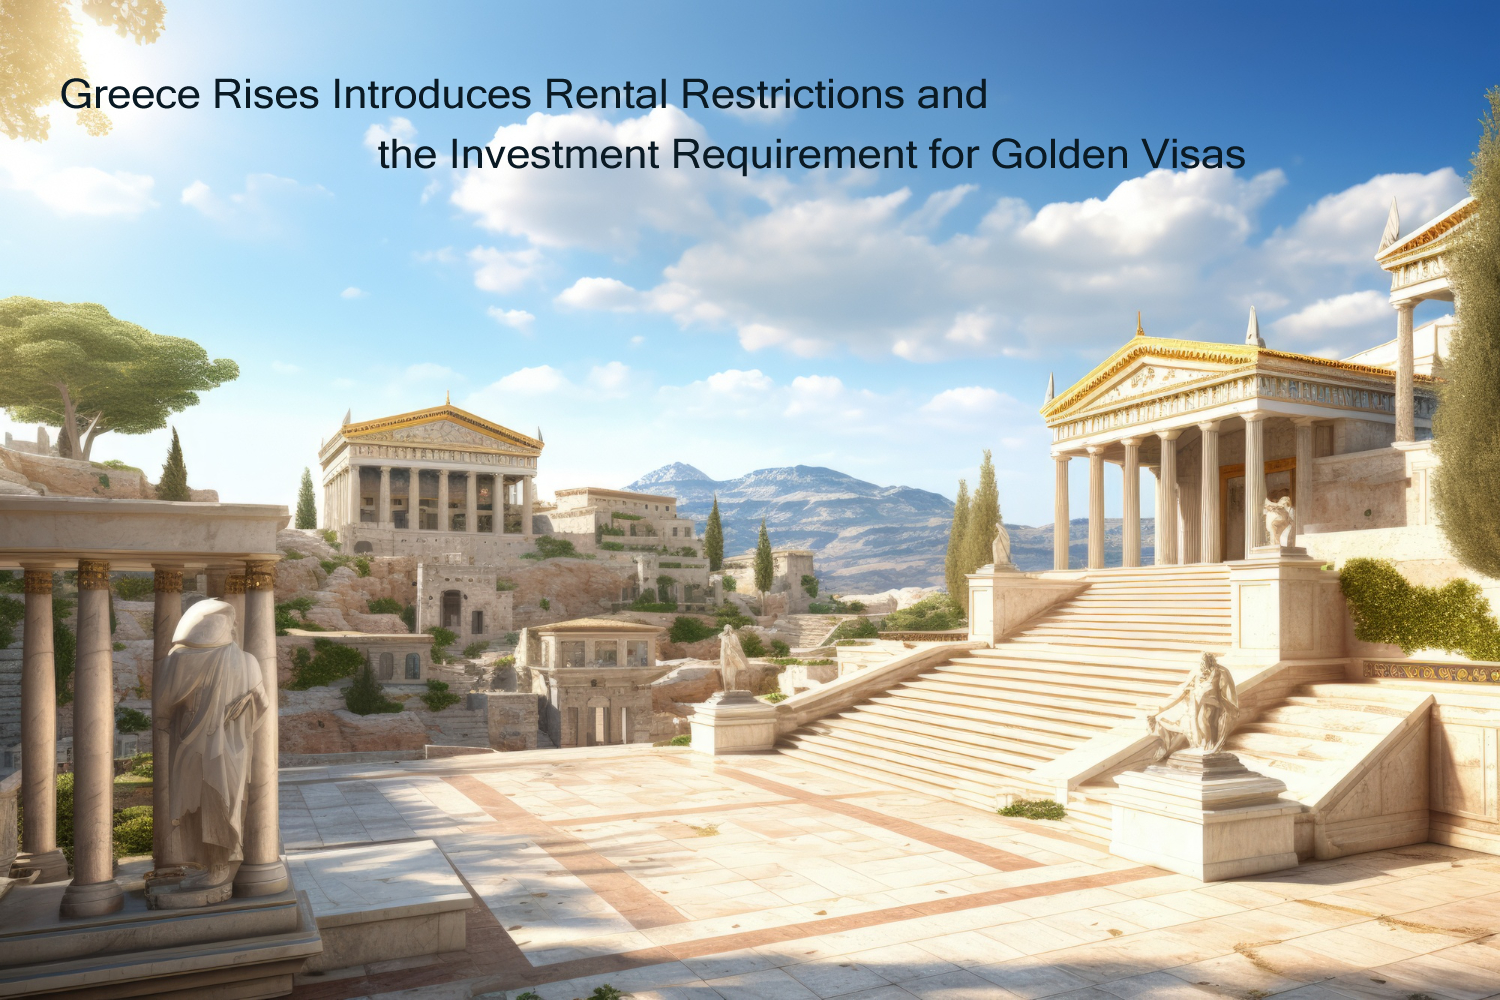 Greece Rises Introduces Rental Restrictions and the Investment Requirement for Golden Visas.